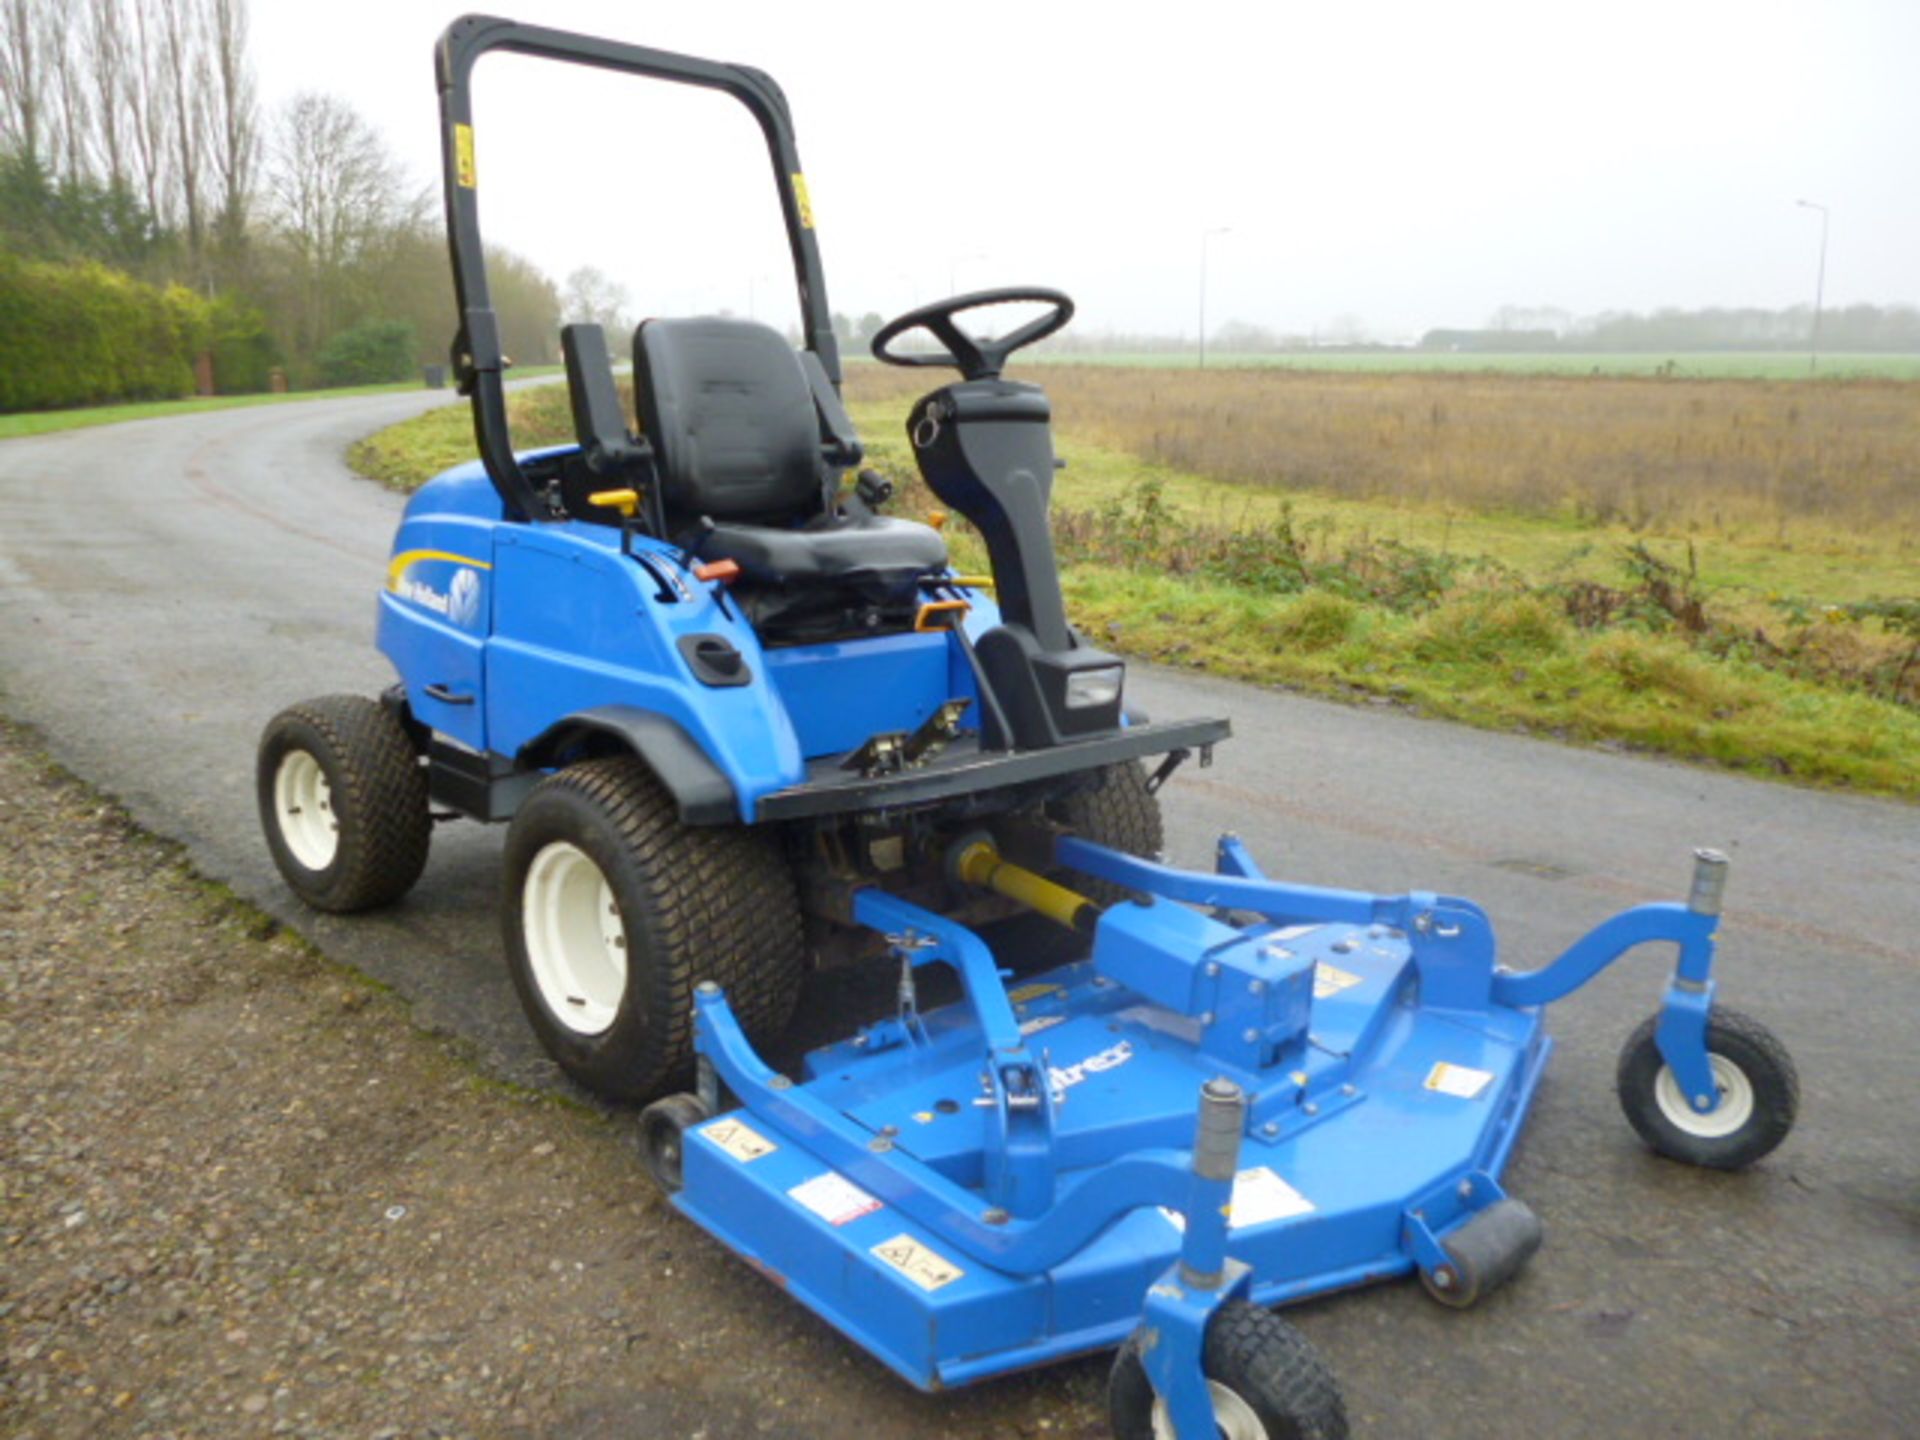 NEW HOLLAND G6035 OUTFRONT RIDE ON MOWER